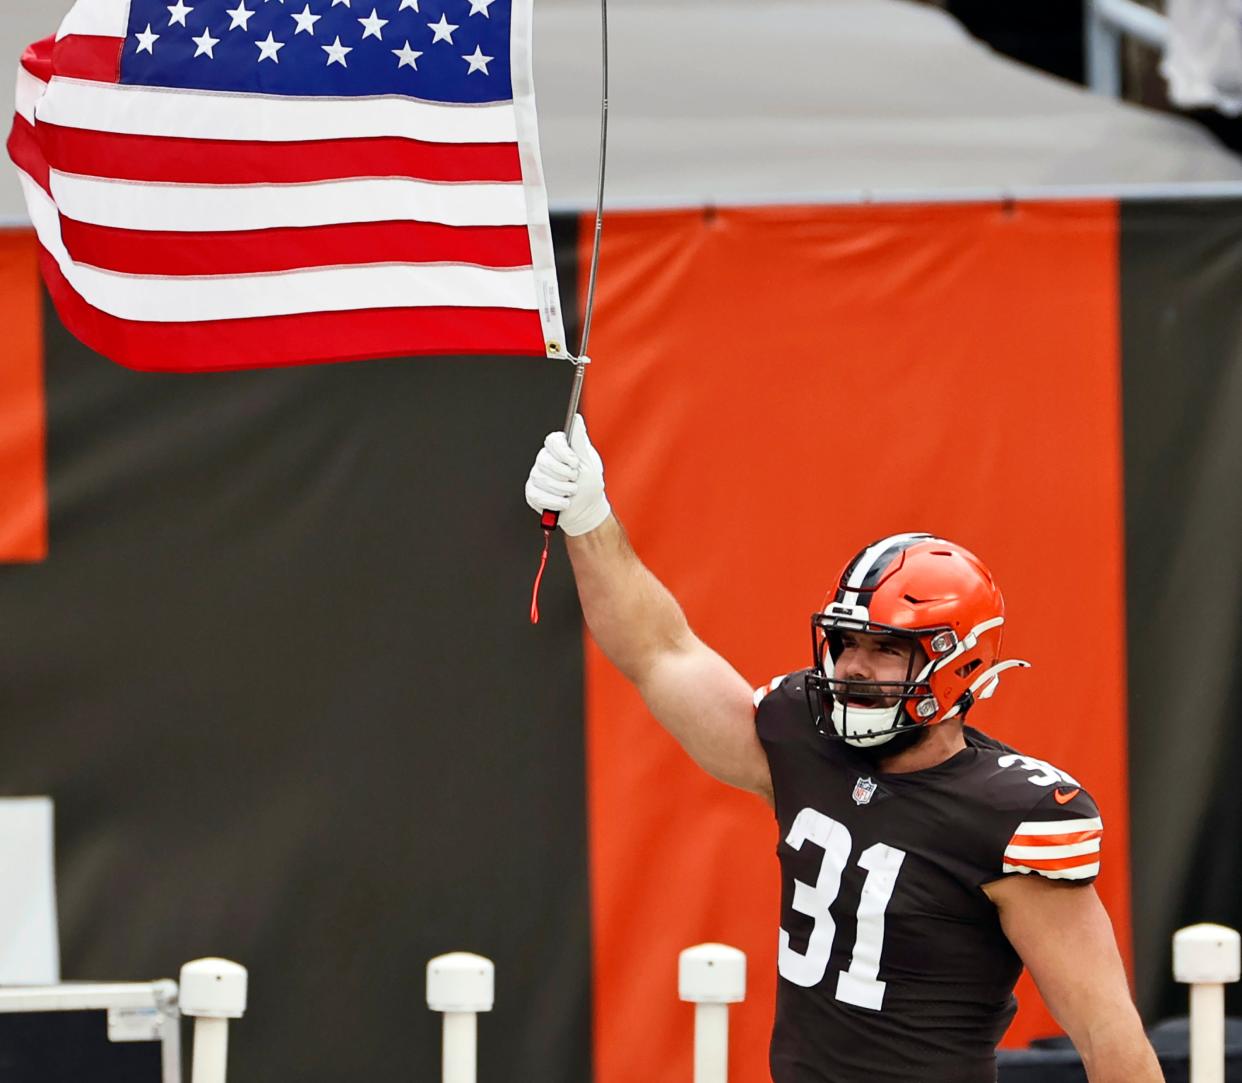 FILE - In this Nov. 15, 2020, file photo, Cleveland Browns running back Andy Janovich holds up a United States flag before an NFL football game against the Houston Texans in Cleveland. Janovich was placed on the COVID-list on Monday, Nov. 16, 2020, a day after he played in a win over the Texans. (AP Photo/Ron Schwane, File)